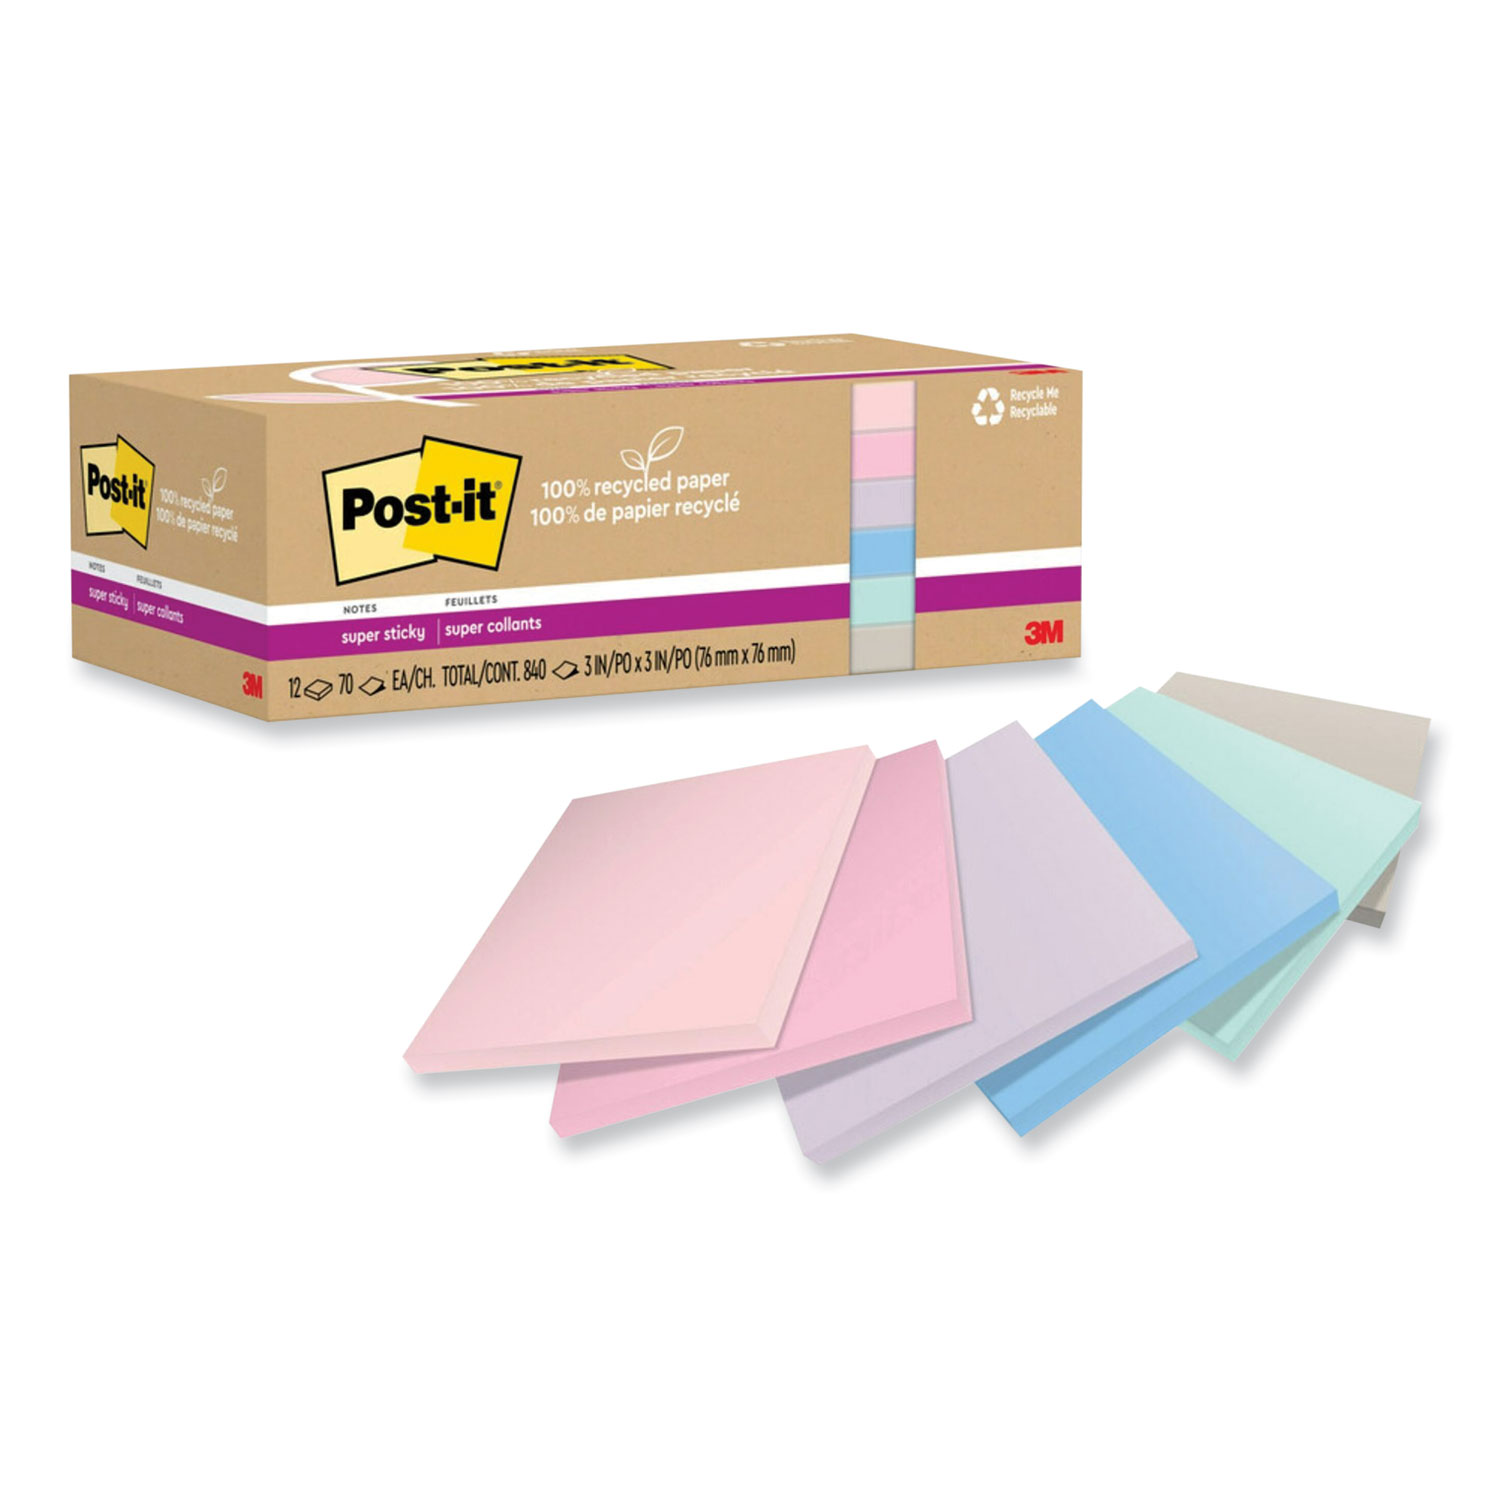 Post-it Recycled Super Sticky Notes Made with 100% Recycled Paper